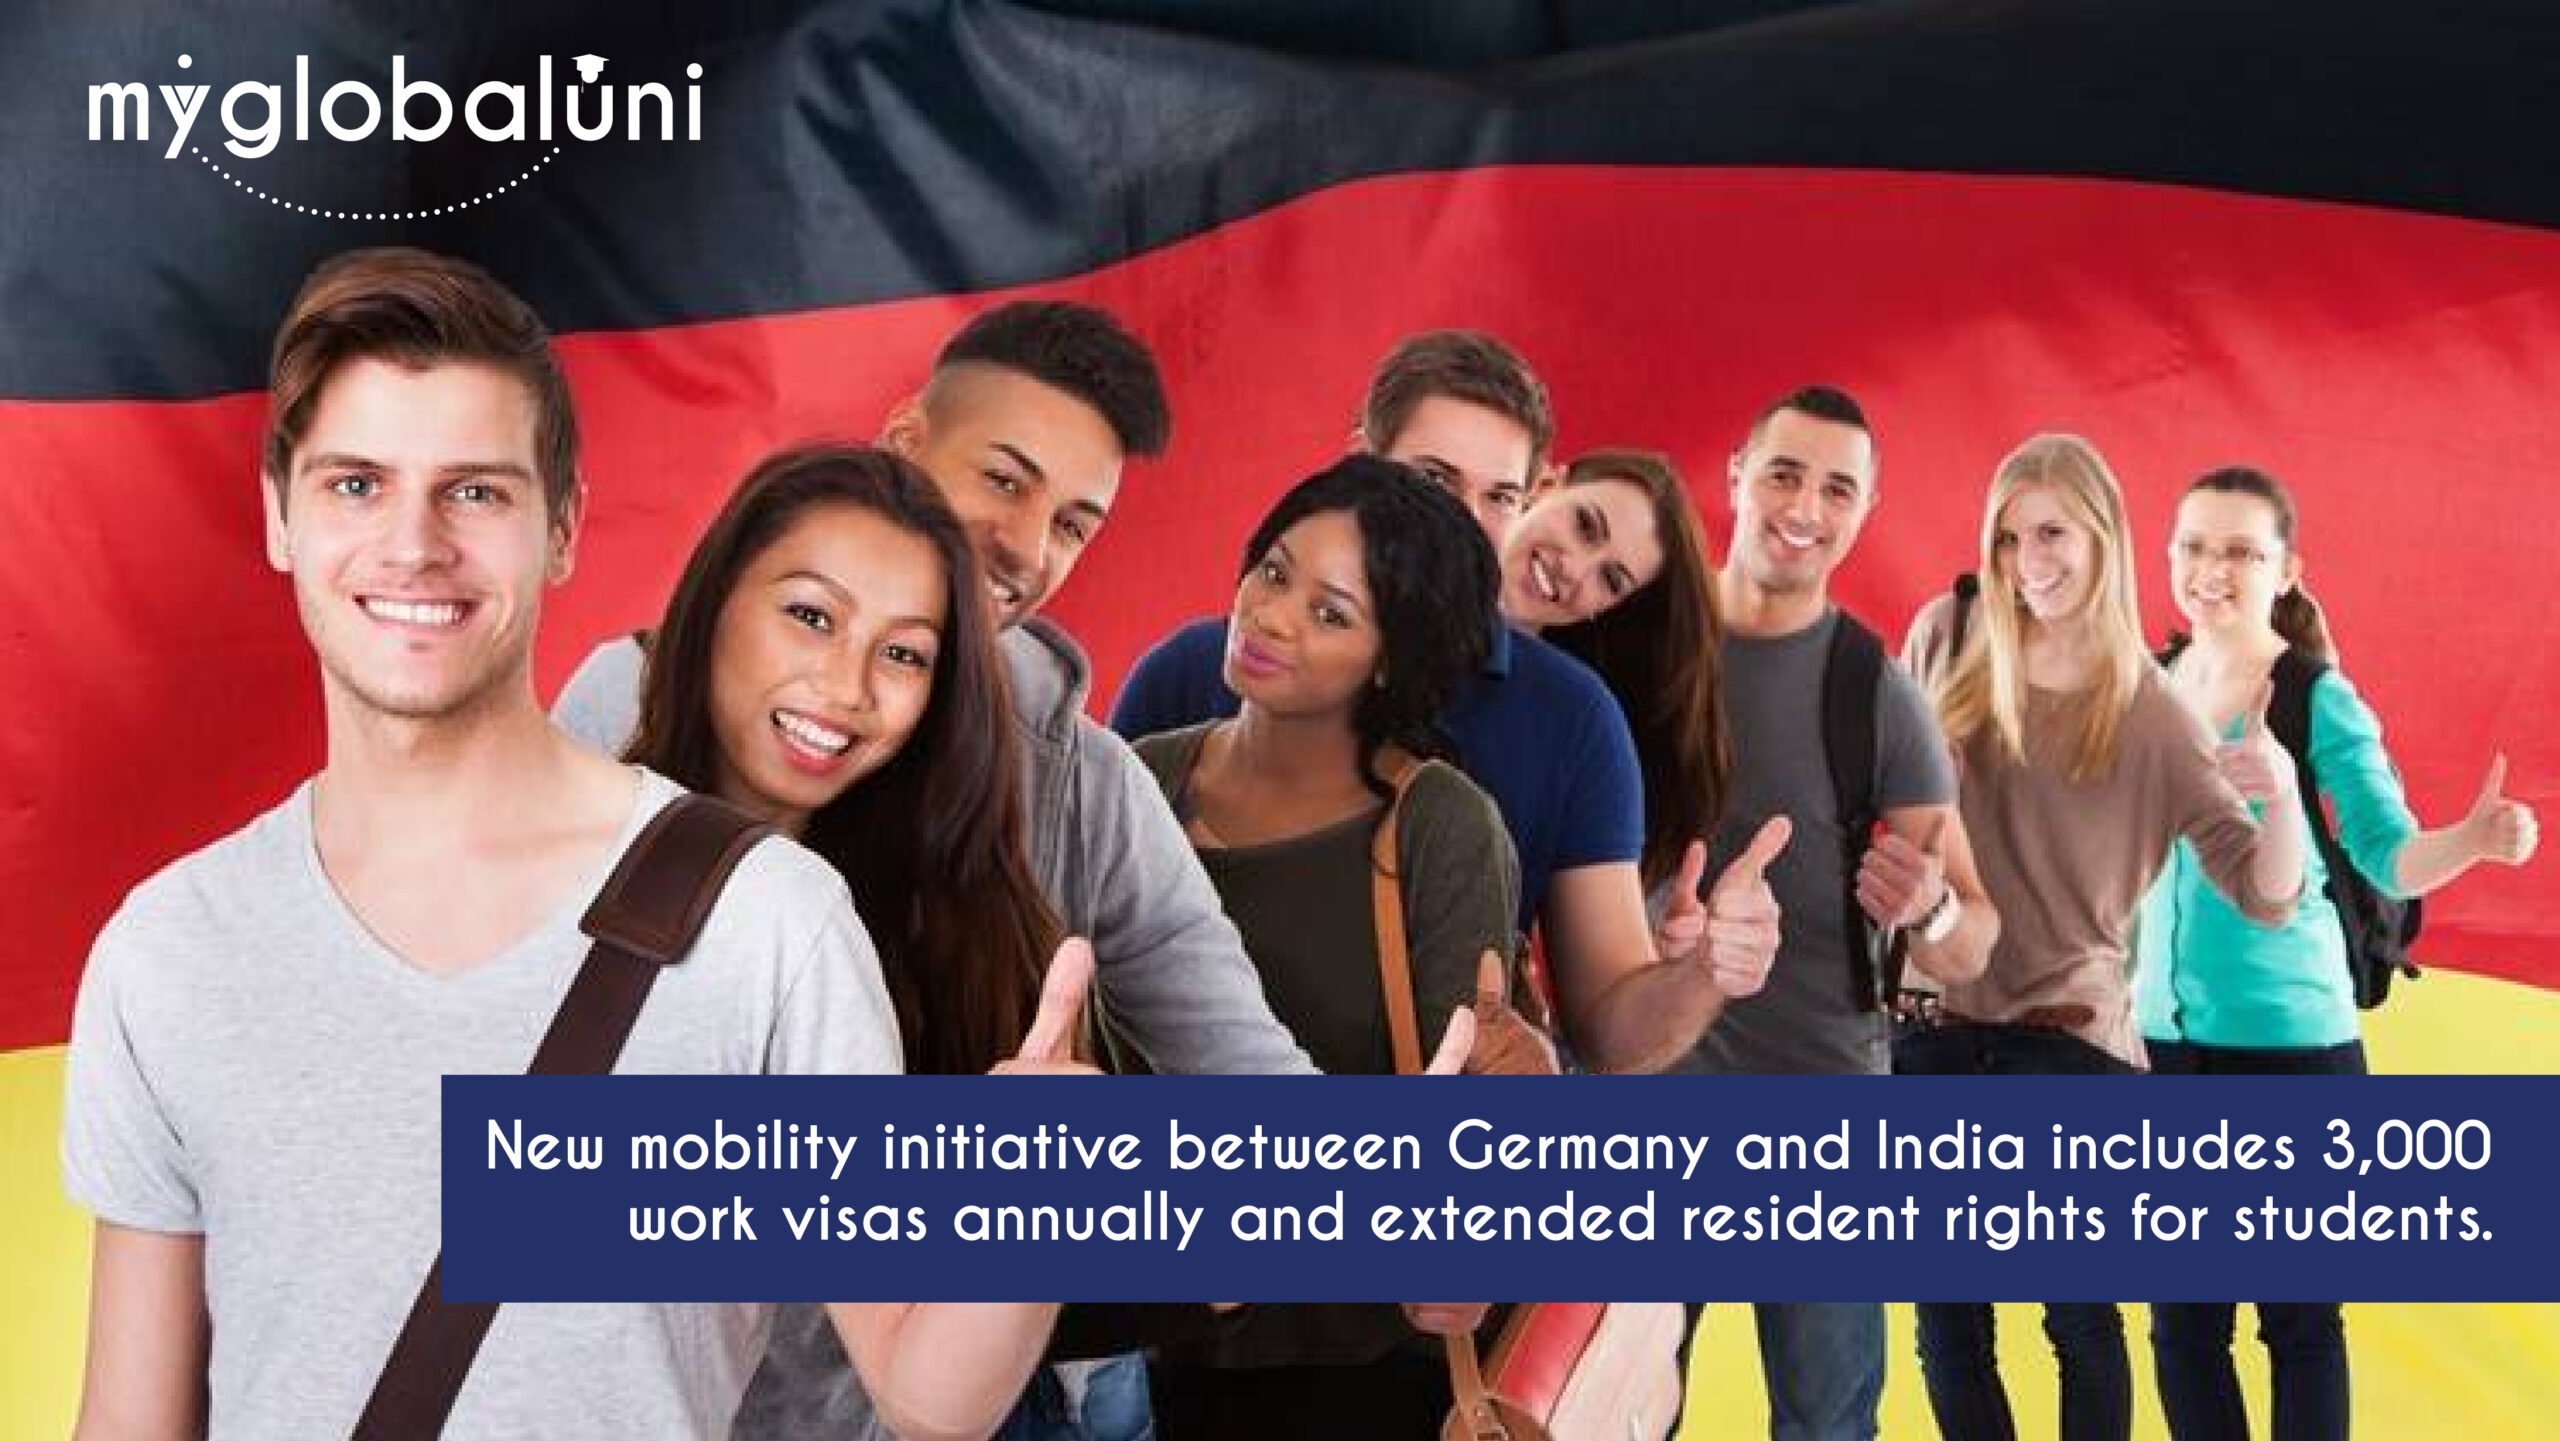 New mobility initiative between Germany and India includes 3,000 work visas annually and extended resident rights for students